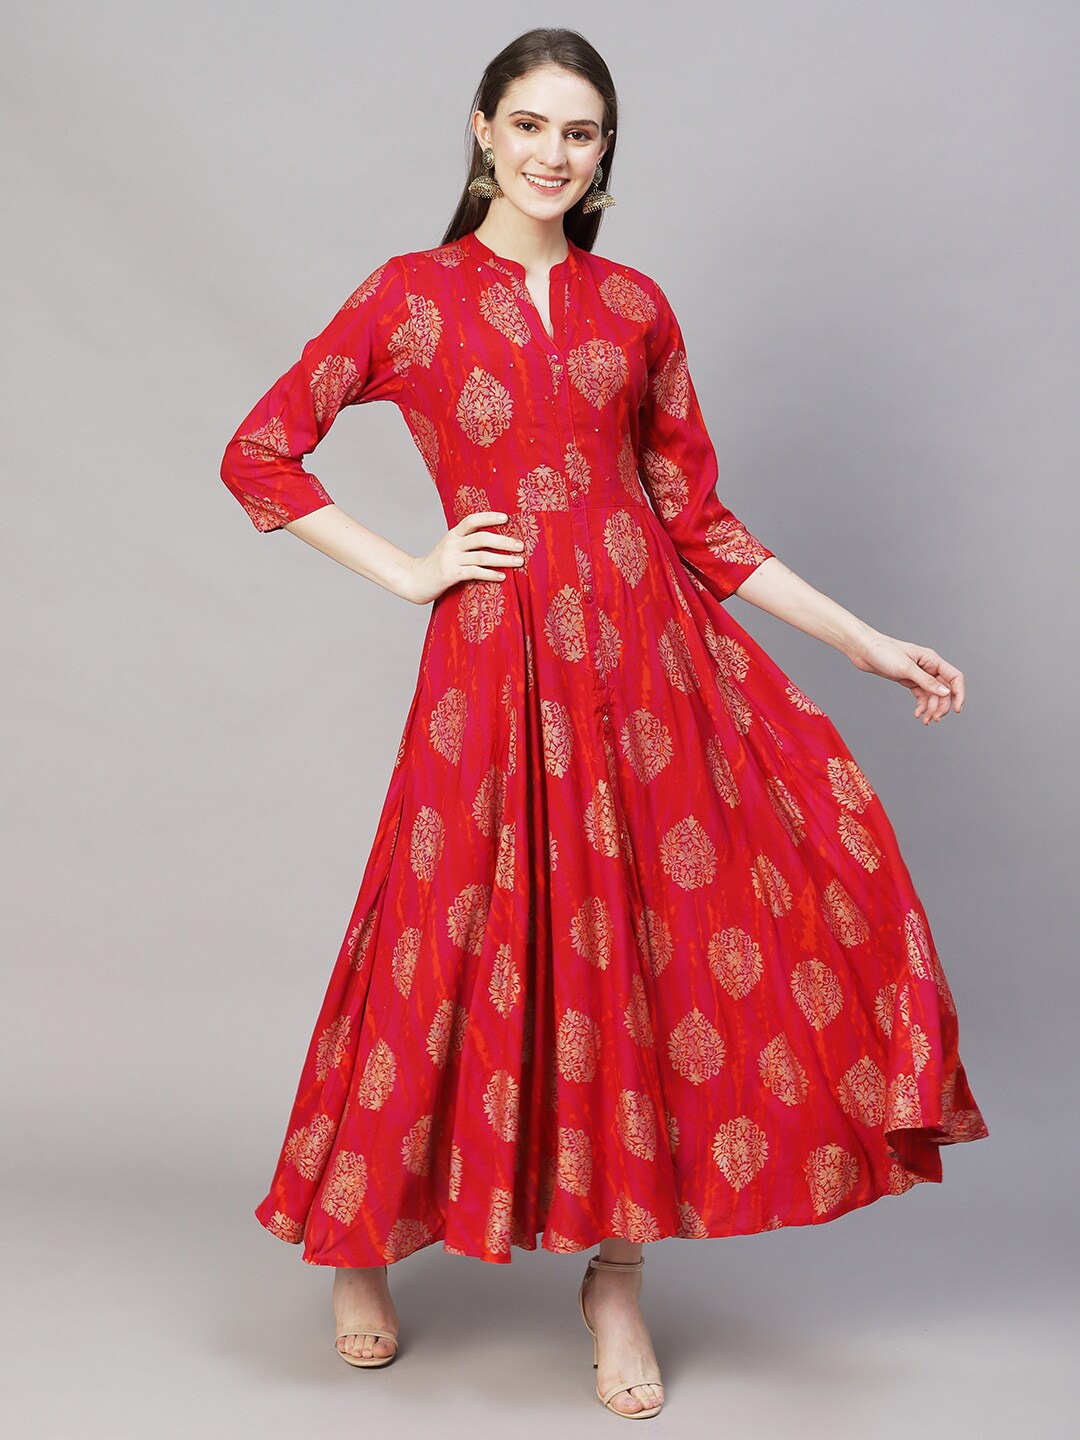 FASHOR Women Red Ethnic Motifs Ethnic Viscose Rayon A-Line Maxi Dress Price in India